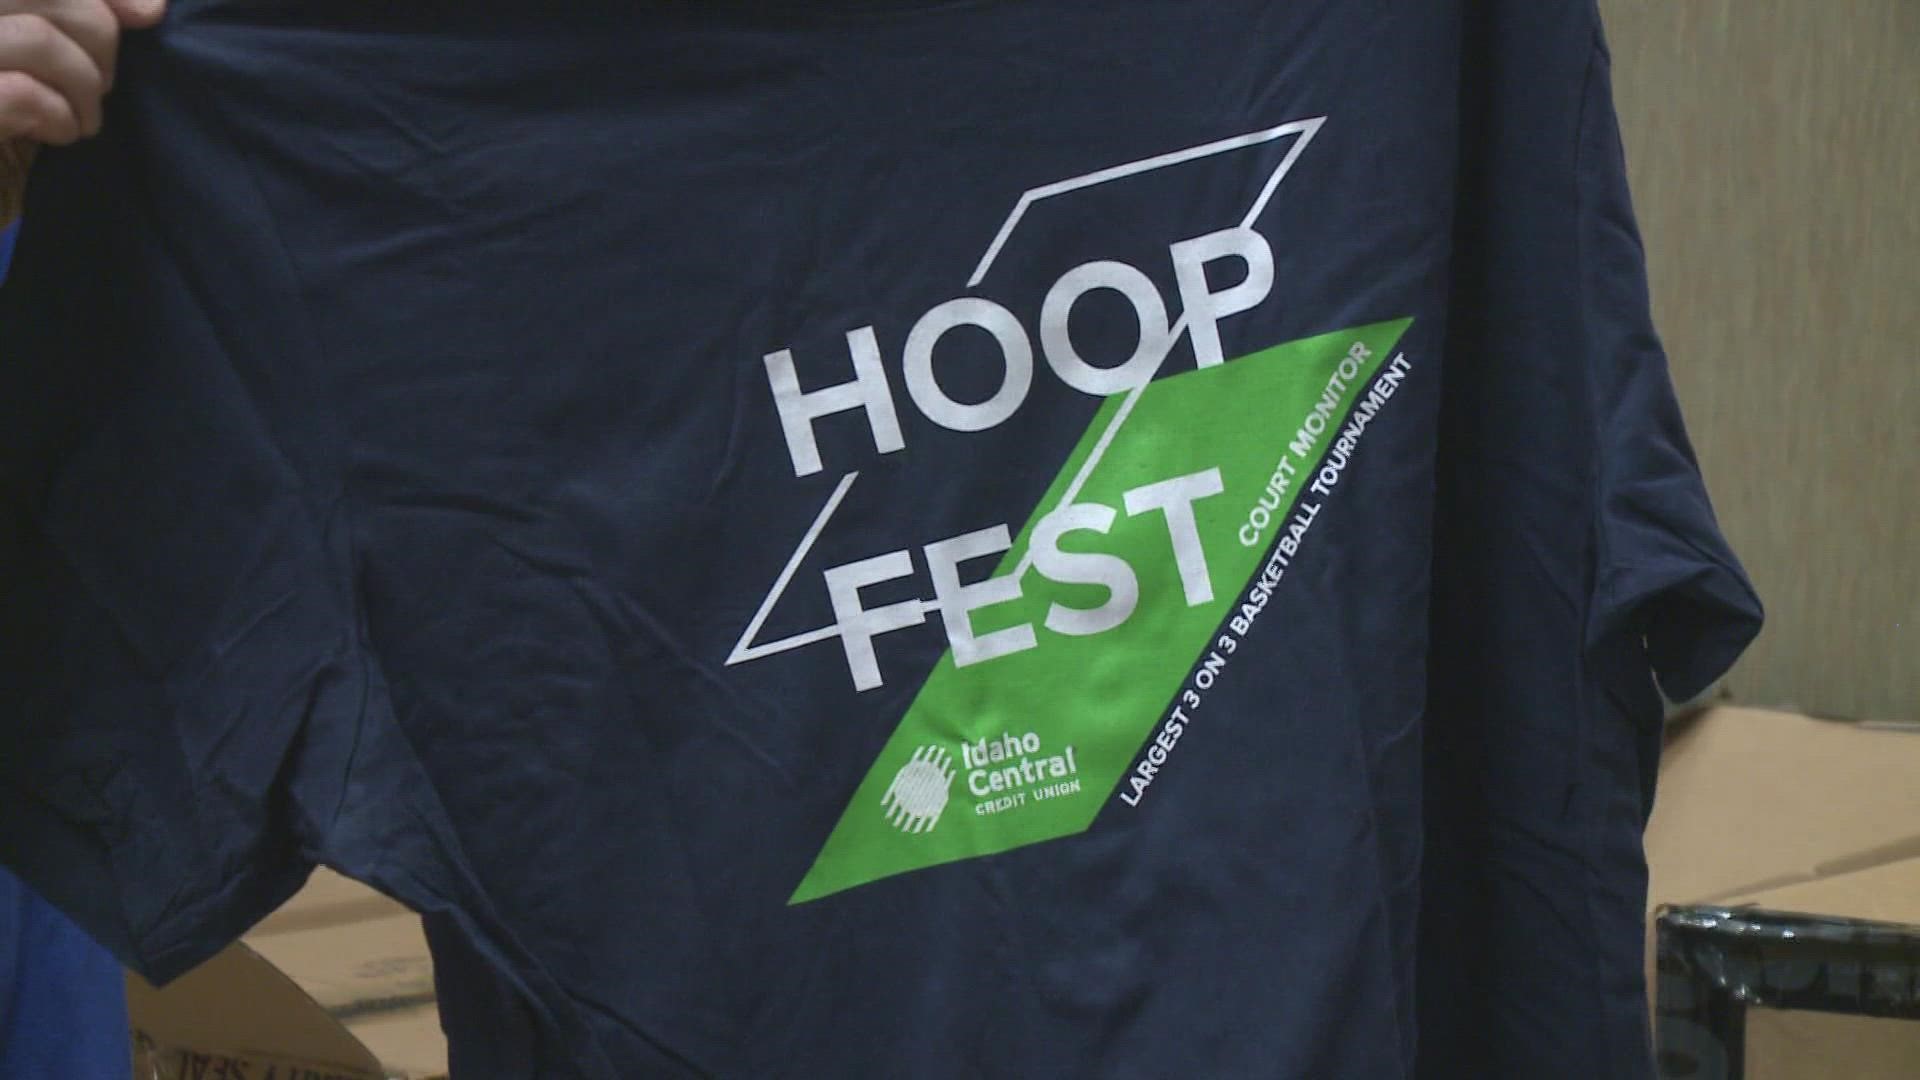 Hoopfest is returning to Spokane for the first time in two years. But, volunteers for the largest 3-on-3 basketball tournament in the world are still needed.